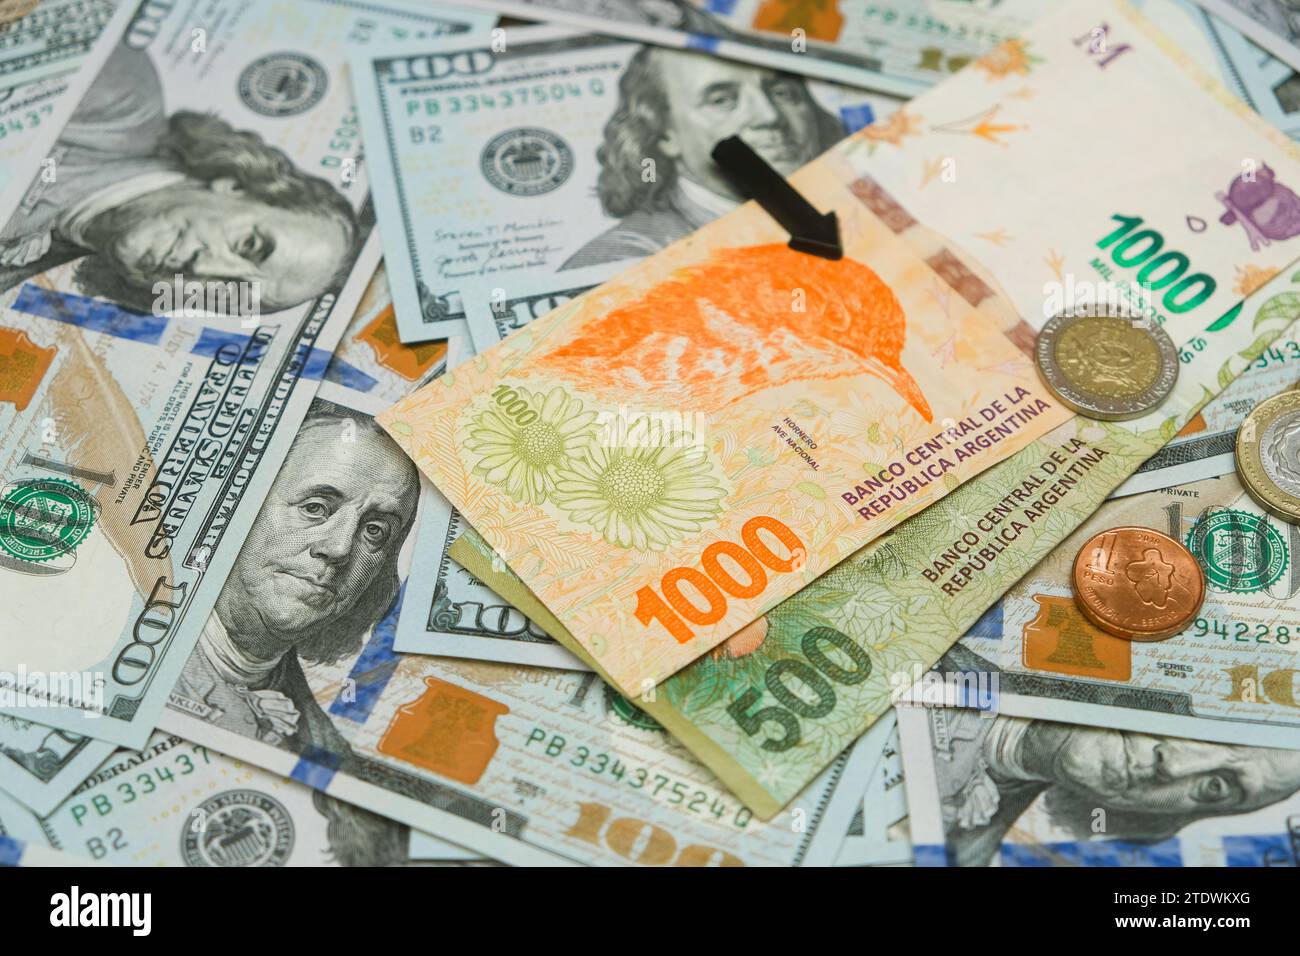 Argentine Banknotes And Coins With Black Arrow Heading Downward On US Dollars Background. Economic Situation Of Argentina. Financial Crisis Concept Stock Photo